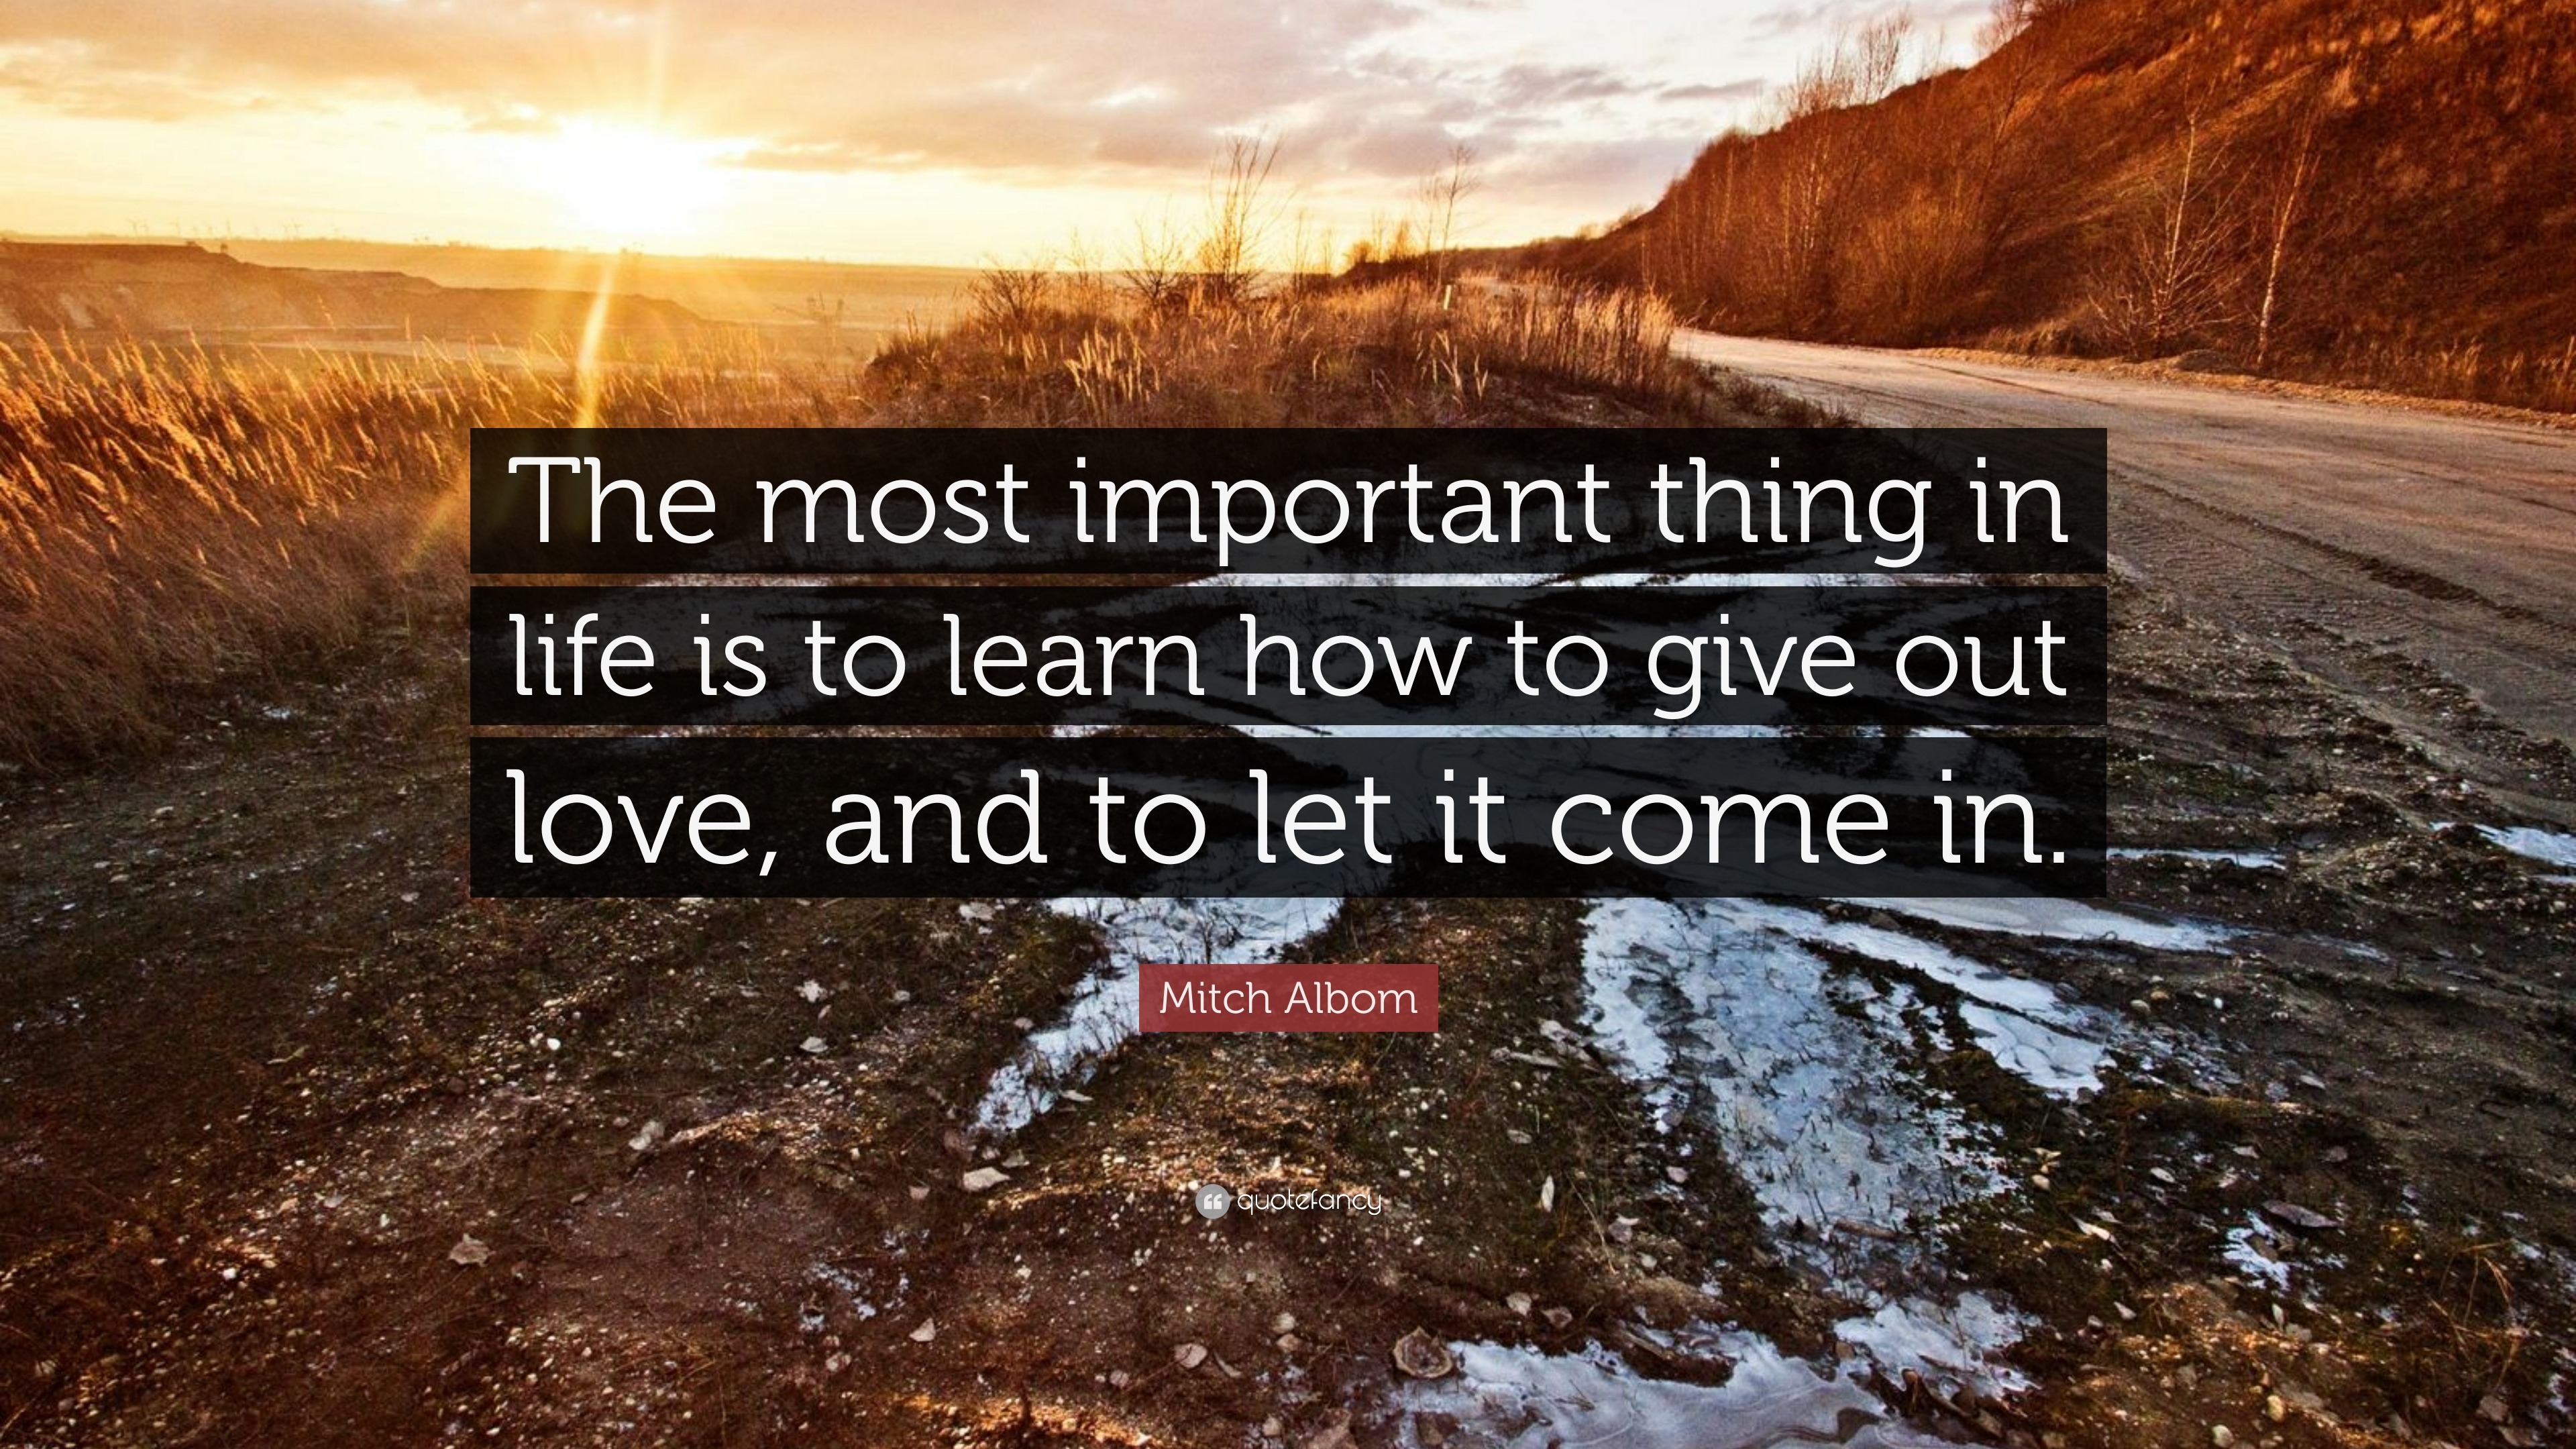 371772 Mitch Albom Quote The Most Important Thing In Life Is To Learn How 